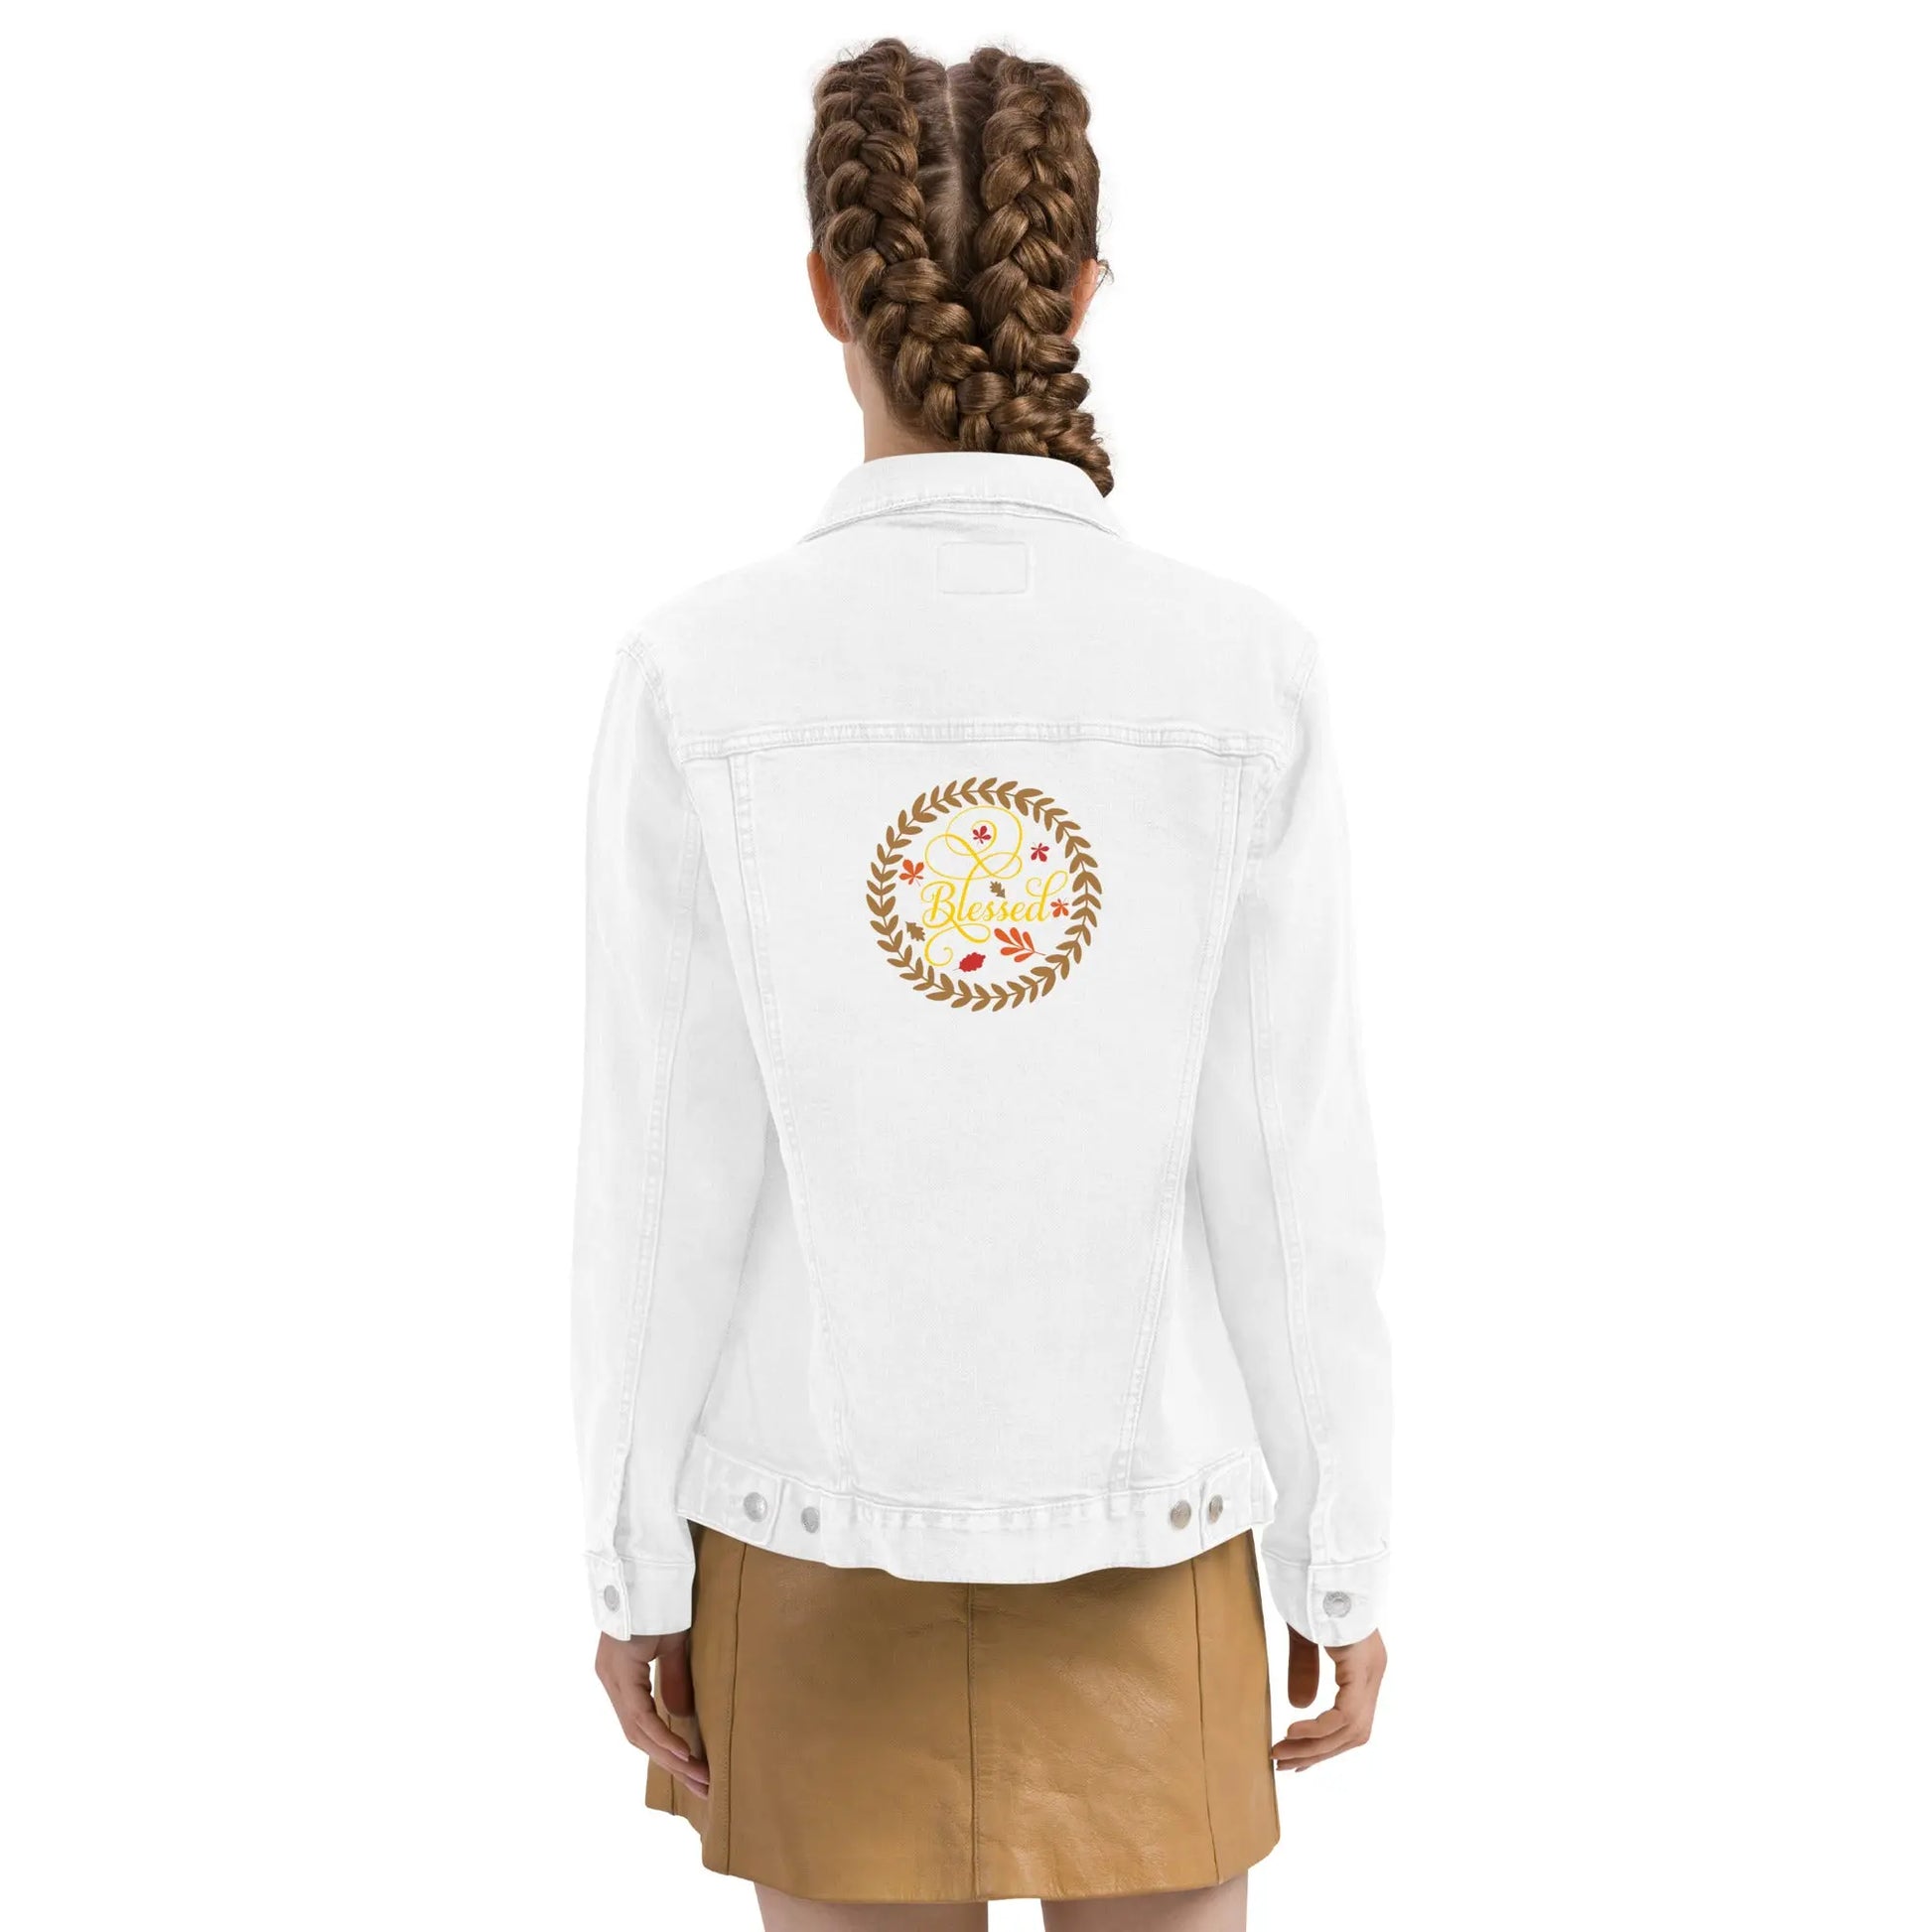 Blessed Fall Leaves Embroidered Denim Jacket Amazing Faith Designs